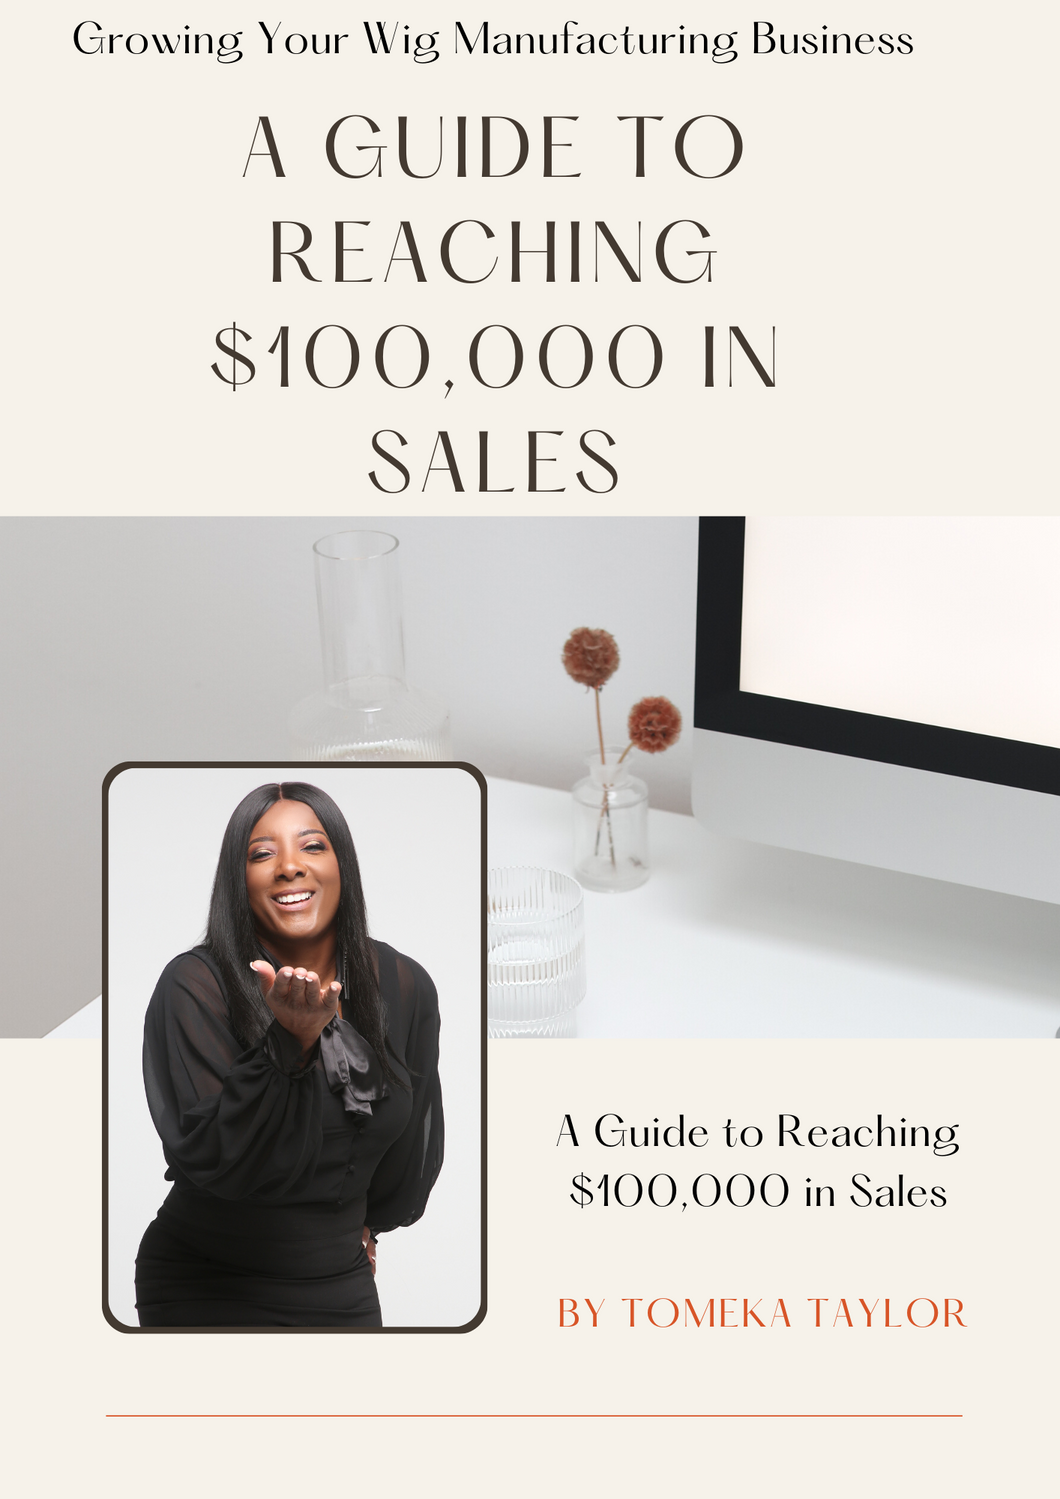 Growing Your Wig Manufacturing Business: A Guide to Reaching $100,000 in Sales